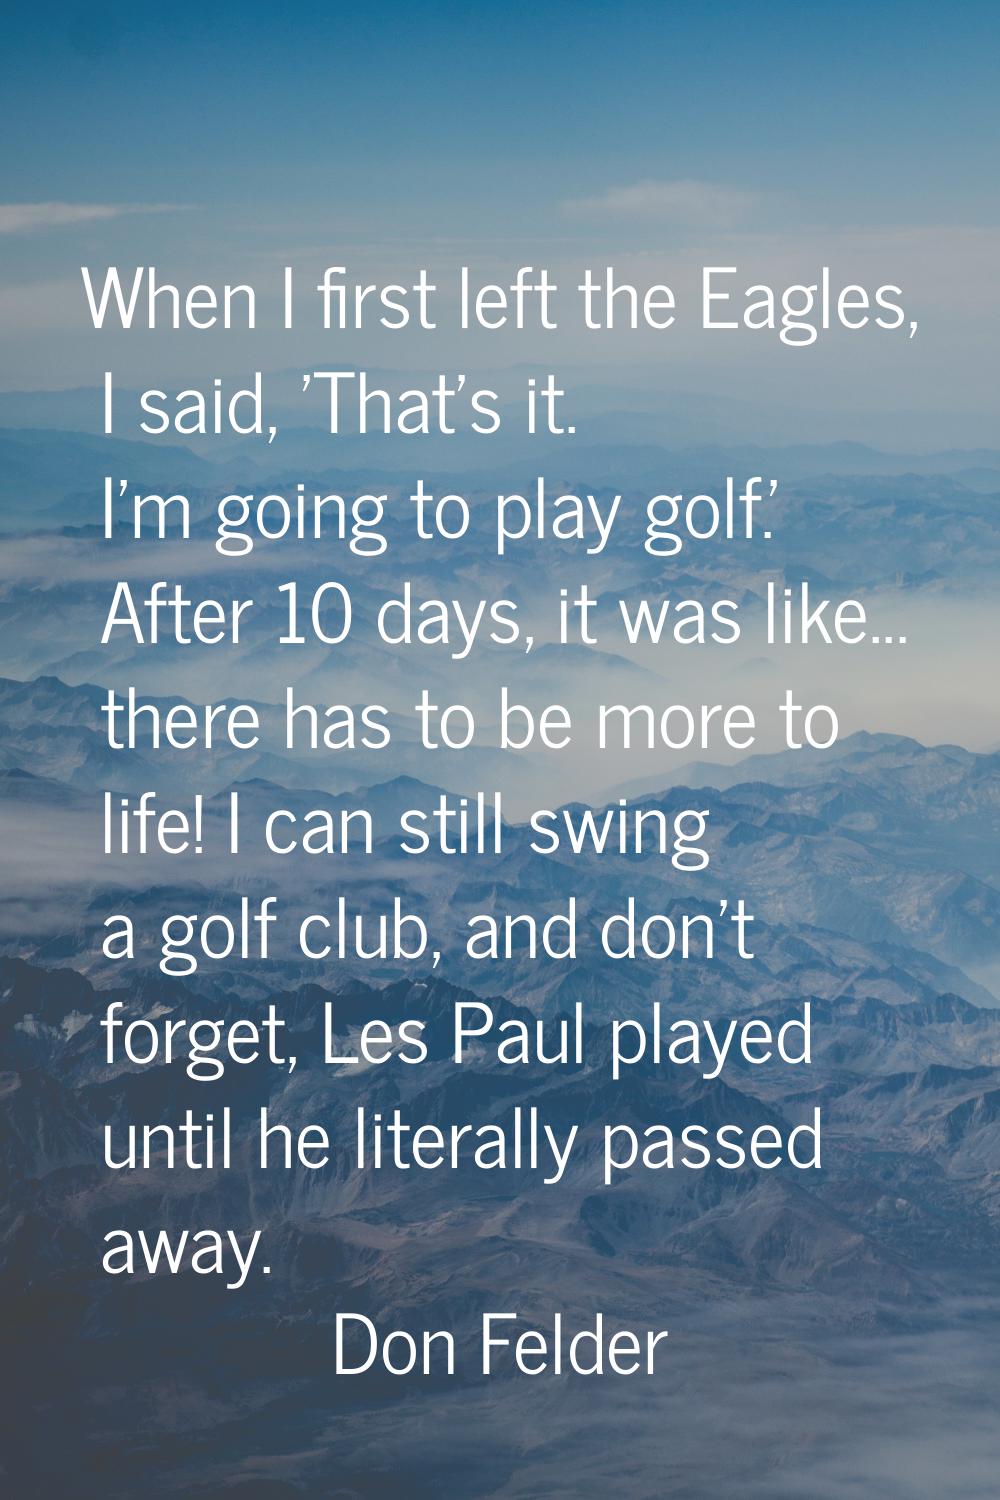 When I first left the Eagles, I said, 'That's it. I'm going to play golf.' After 10 days, it was li